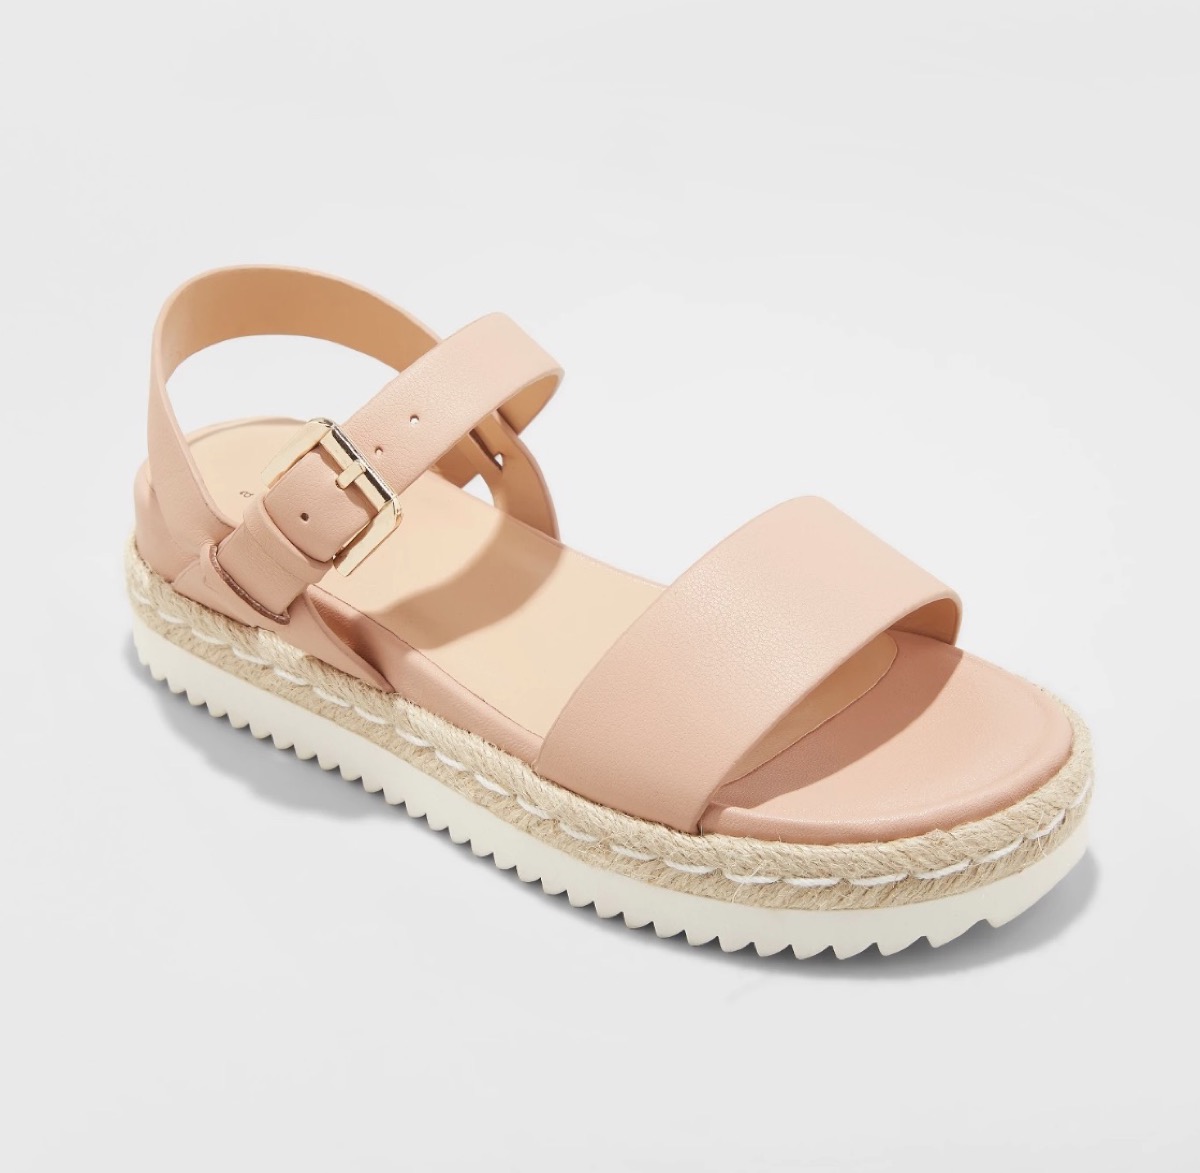 A New Day Espadrille Sandals Target Shopping